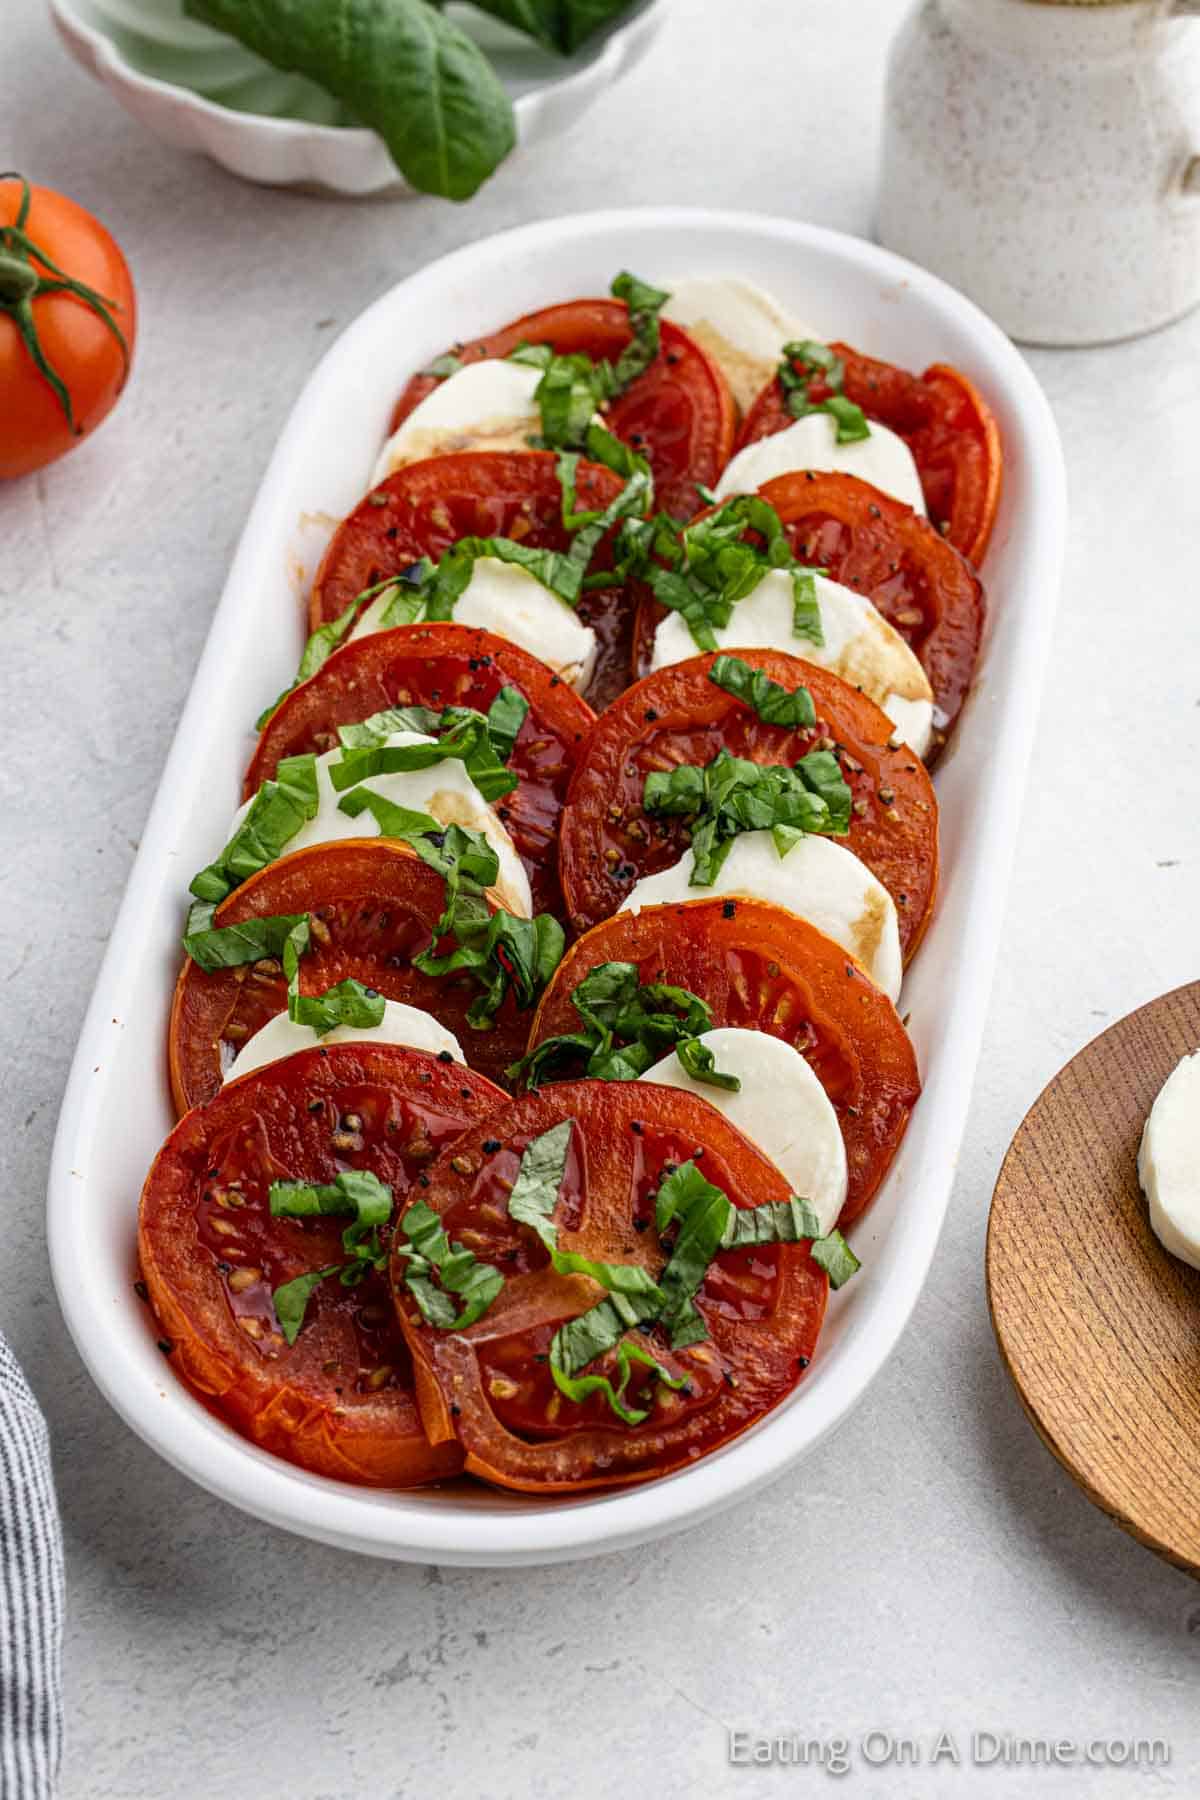 Slice tomatoes and mozzarella cheese salad on a platter